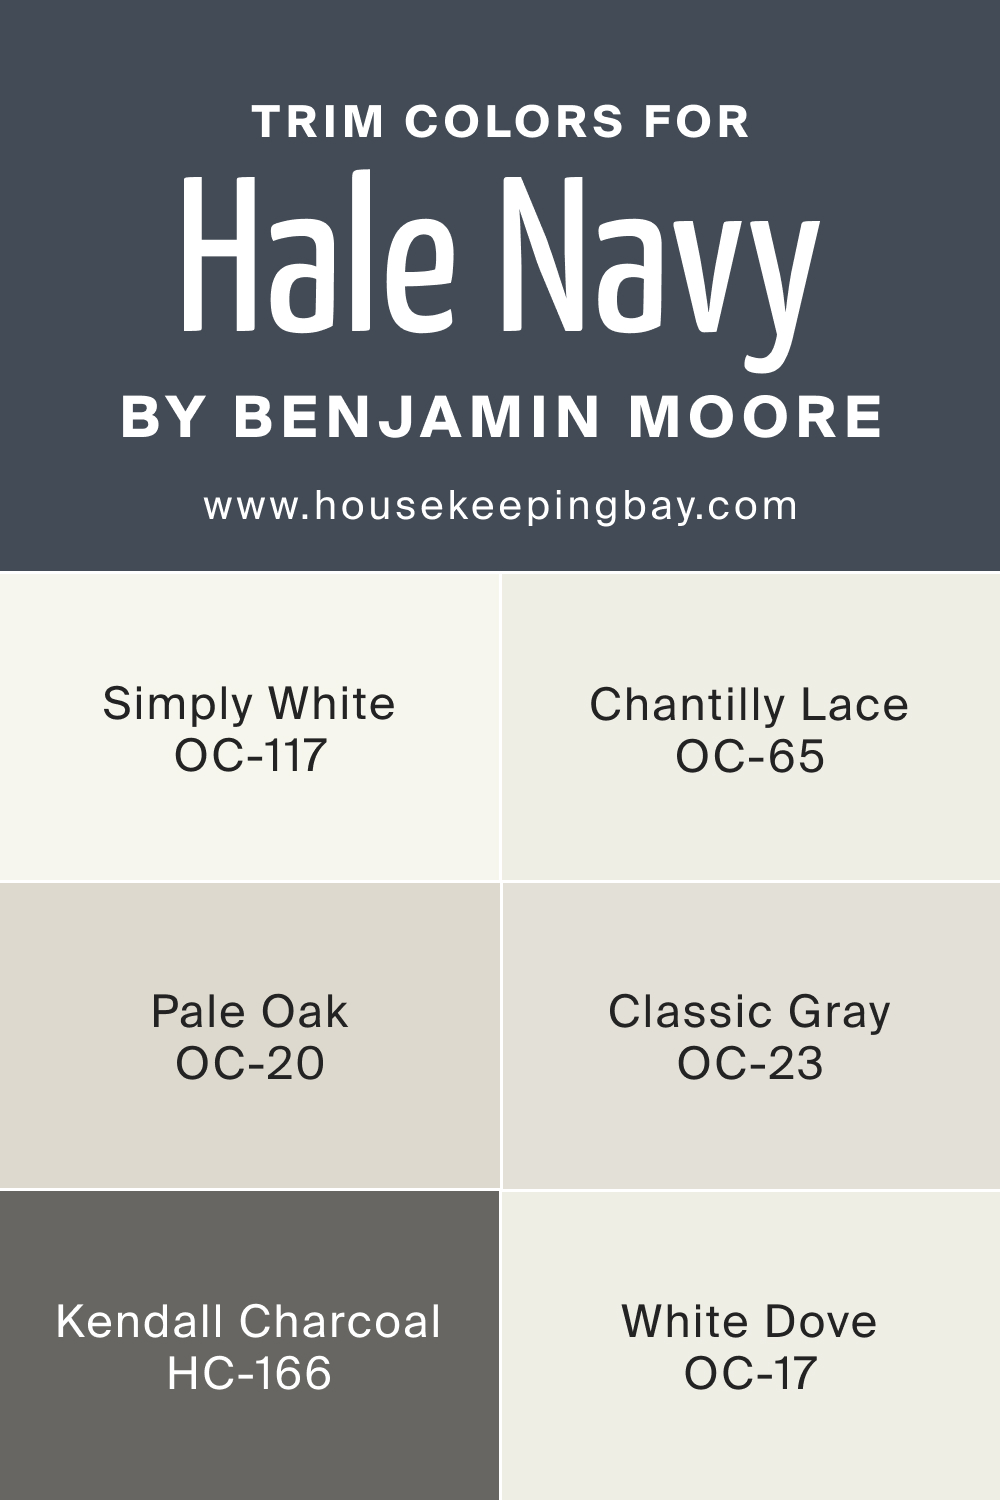 What Is the Best Trim Color For Hale Navy